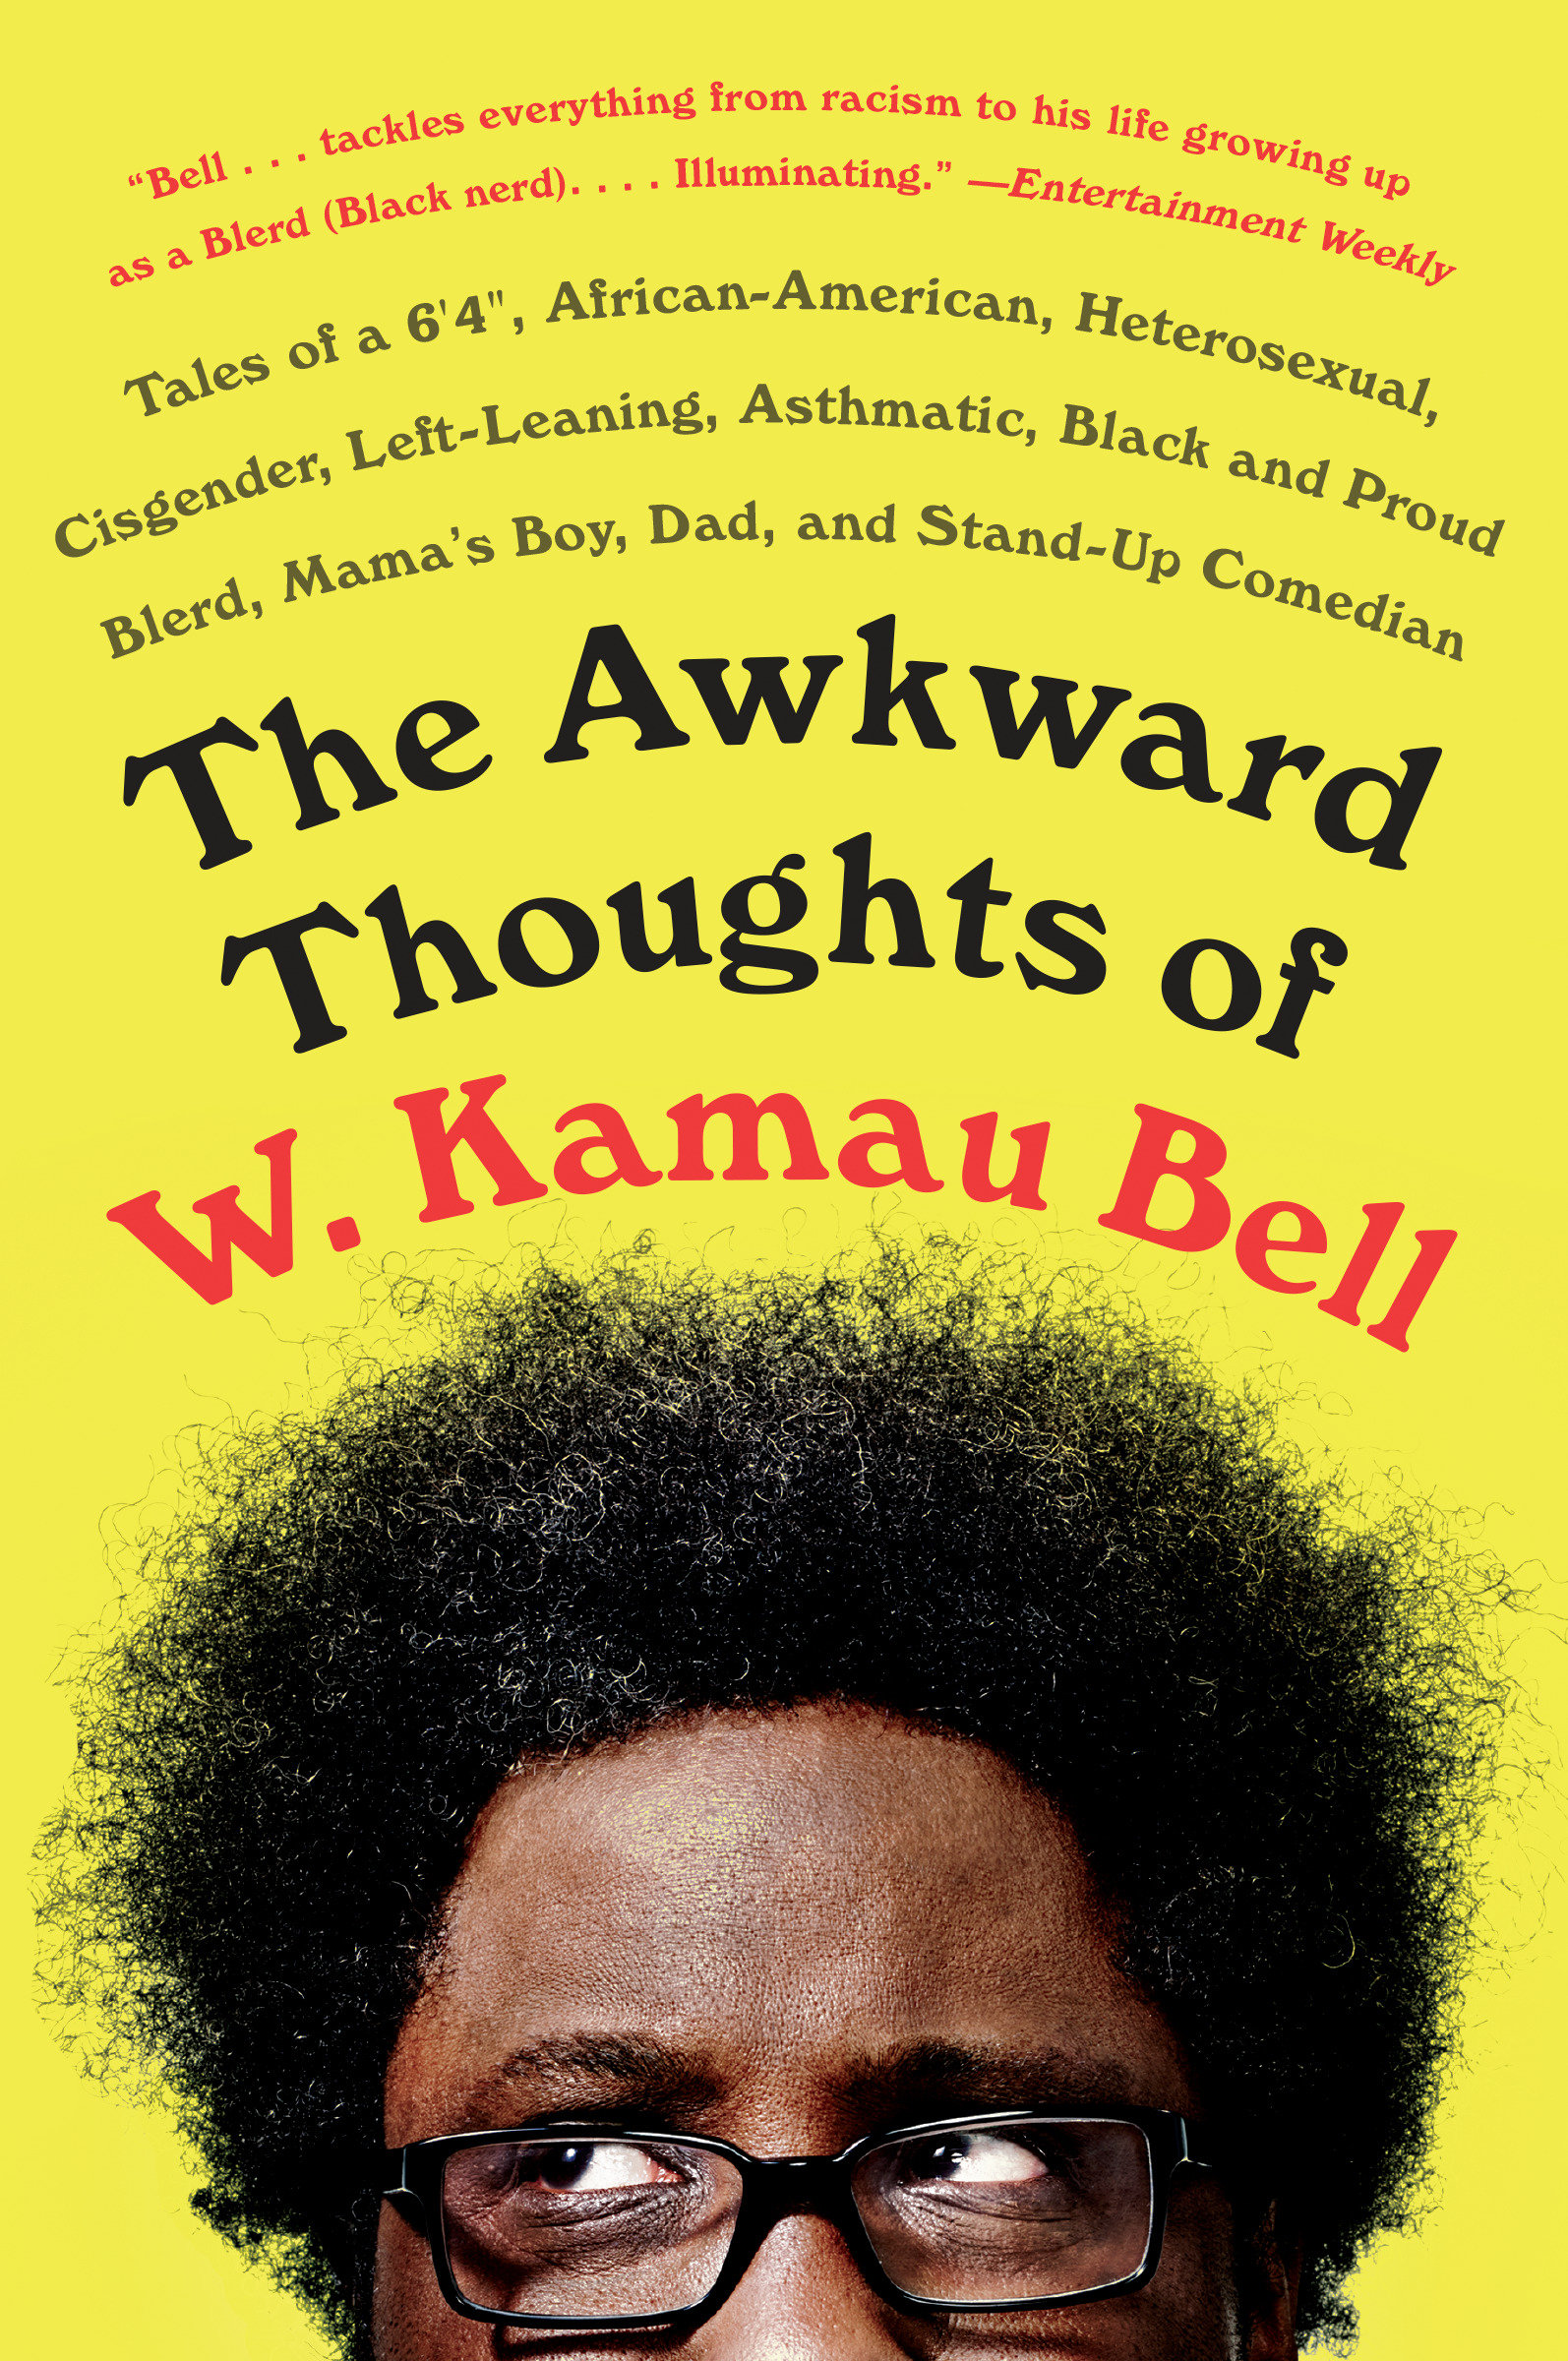 Cover image for The Awkward Thoughts of W. Kamau Bell [electronic resource] : Tales of a 6' 4", African American, Heterosexual, Cisgender, Left-Leaning, Asthmatic, Black and Proud Blerd, Mama's Boy, Dad, and Stand-Up Comedian